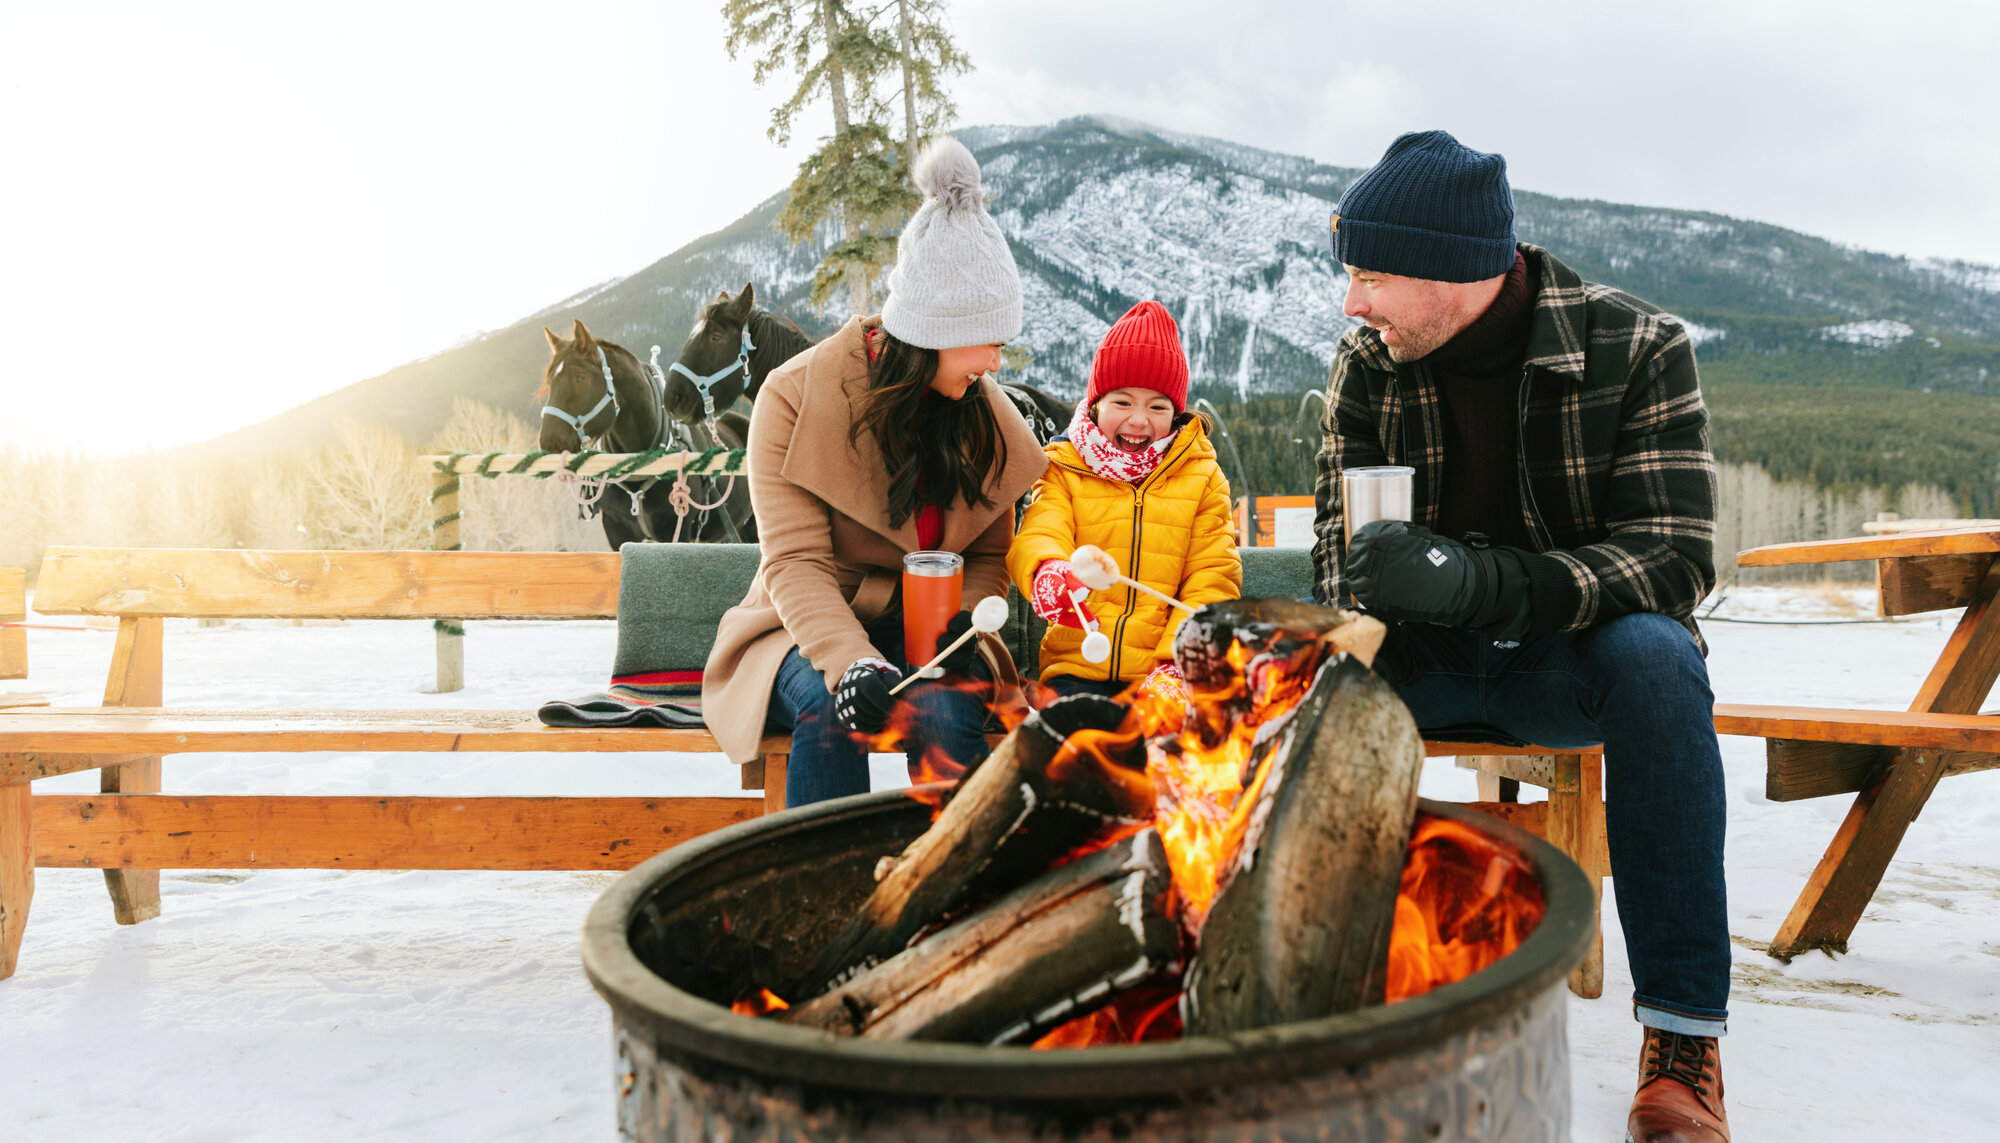 A family warm up by the fire at the Warner Stables in Banff after a sleigh ride